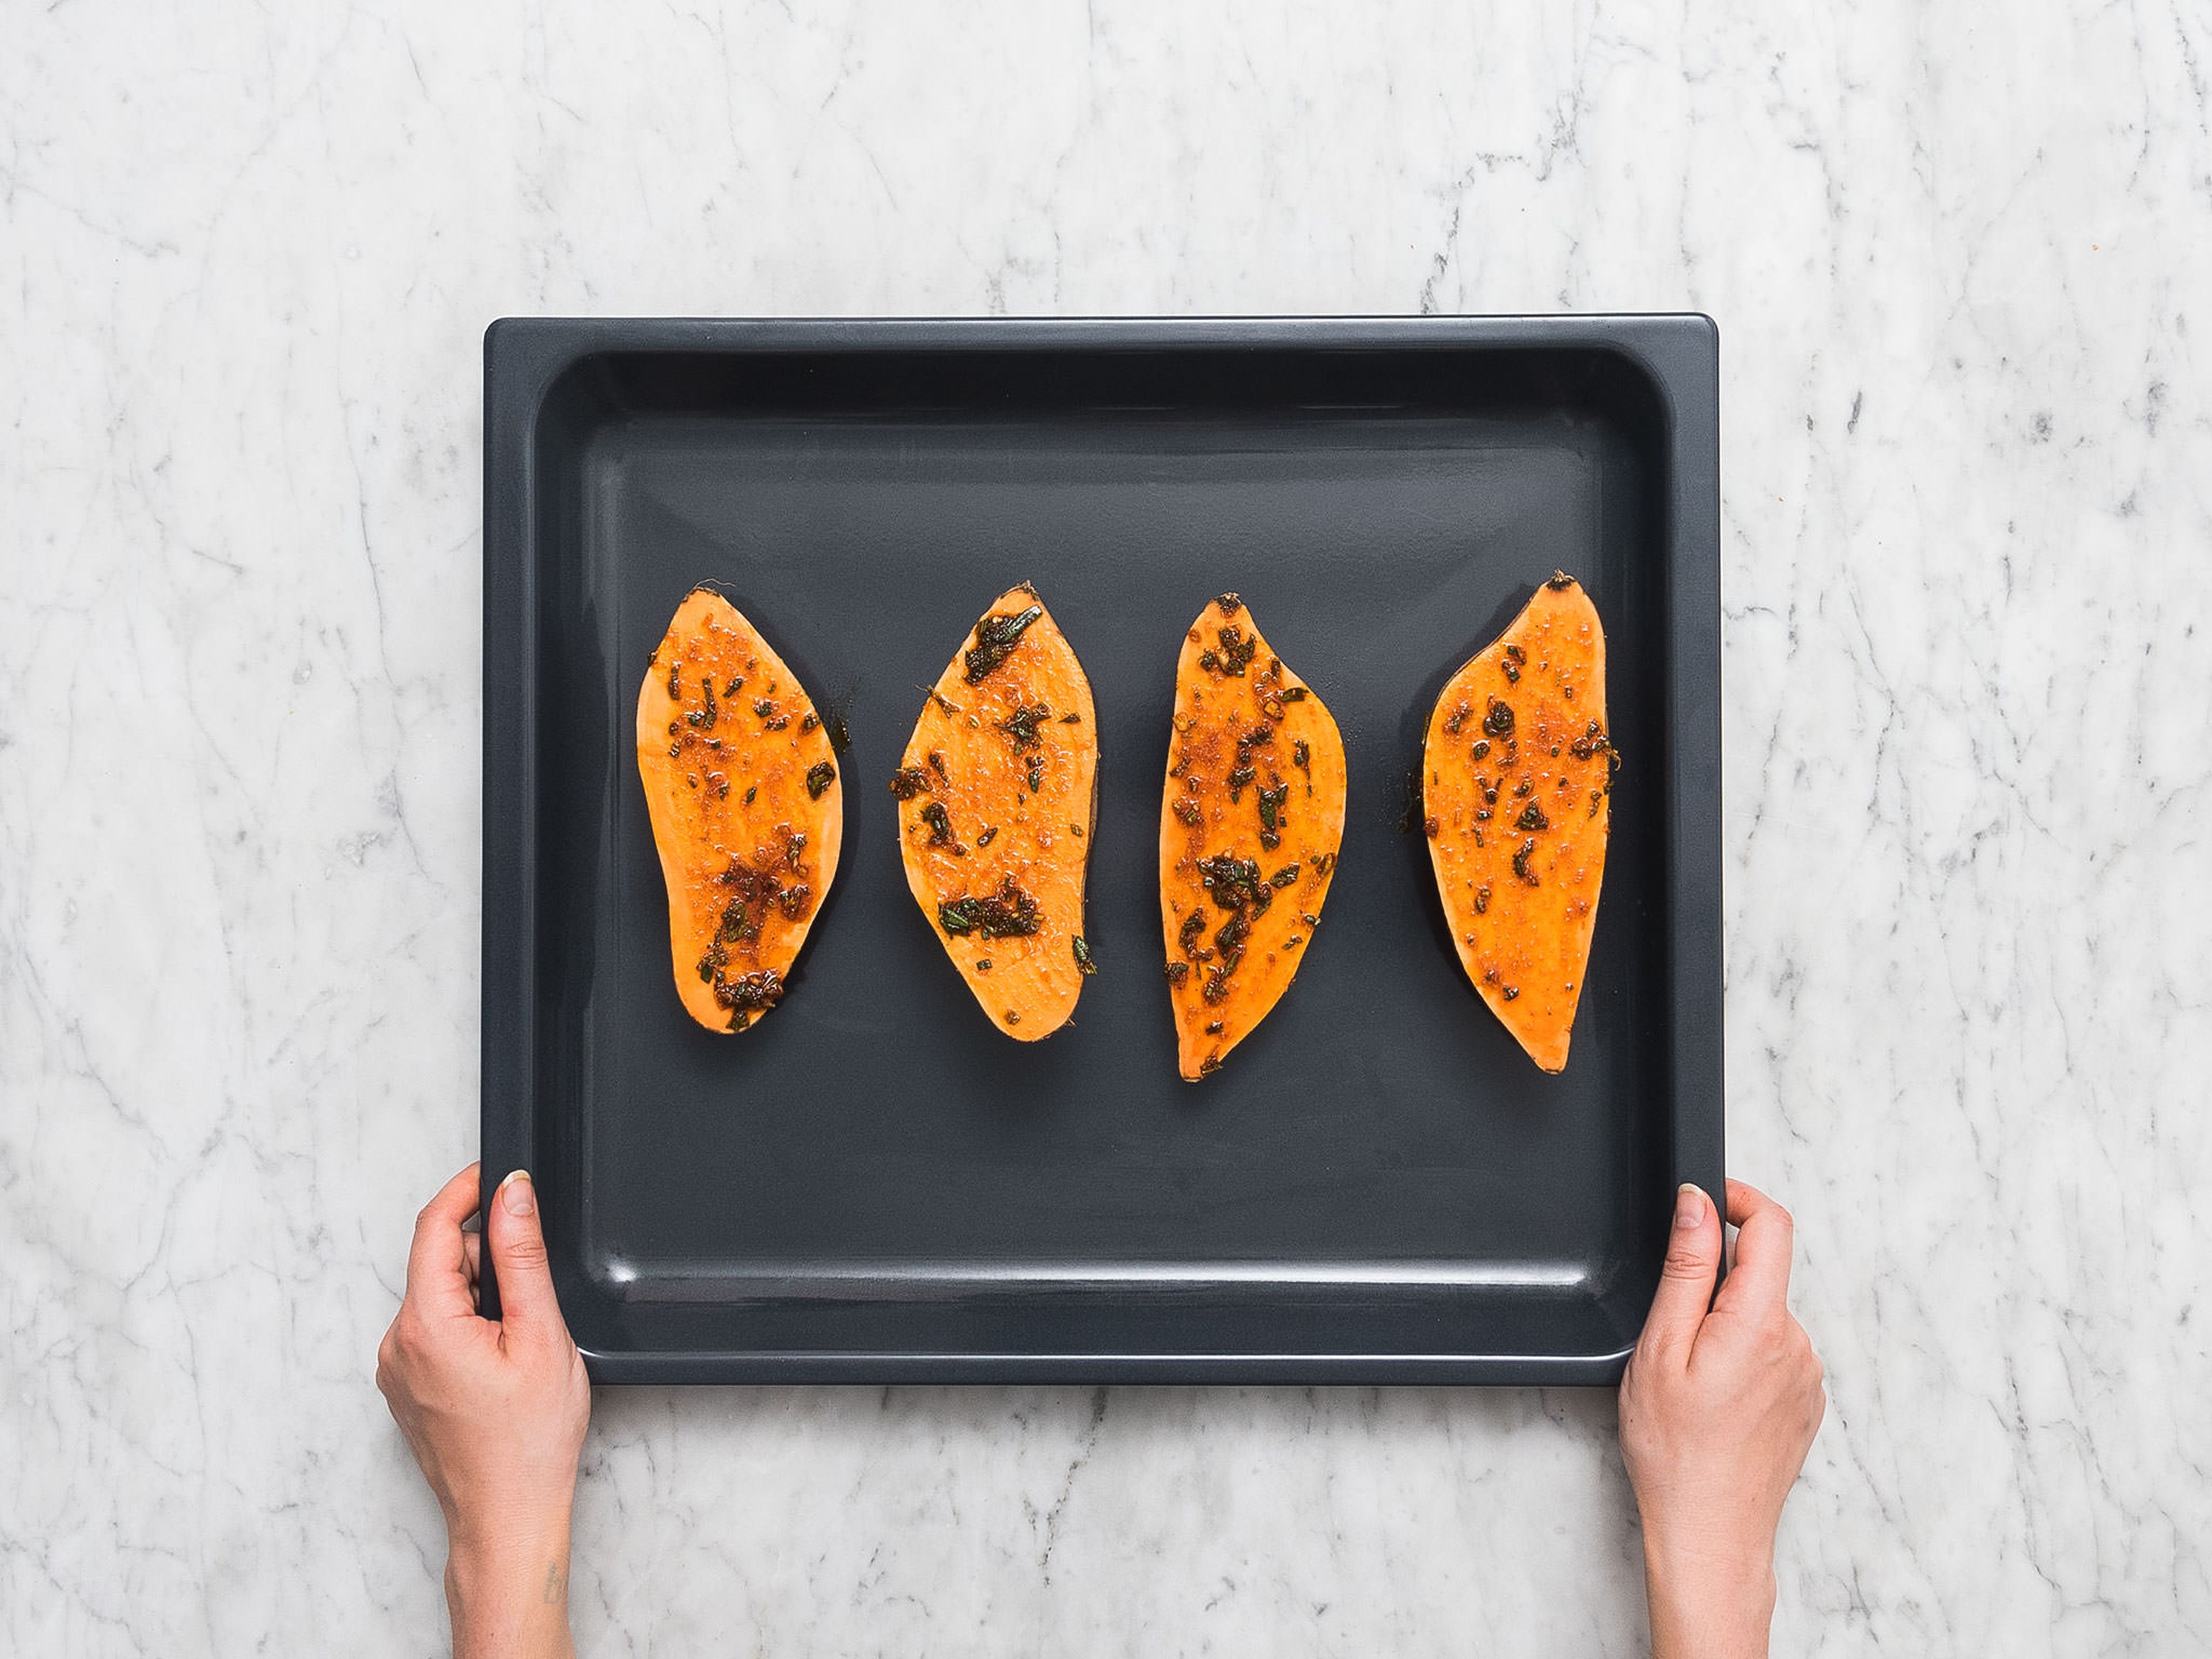 Halve sweet potatoes and brush with marinade. Transfer sweet potatoes to a parchement-lined baking sheet and bake at 220°C/425°F for approx. 15 min., or until fork-tender.